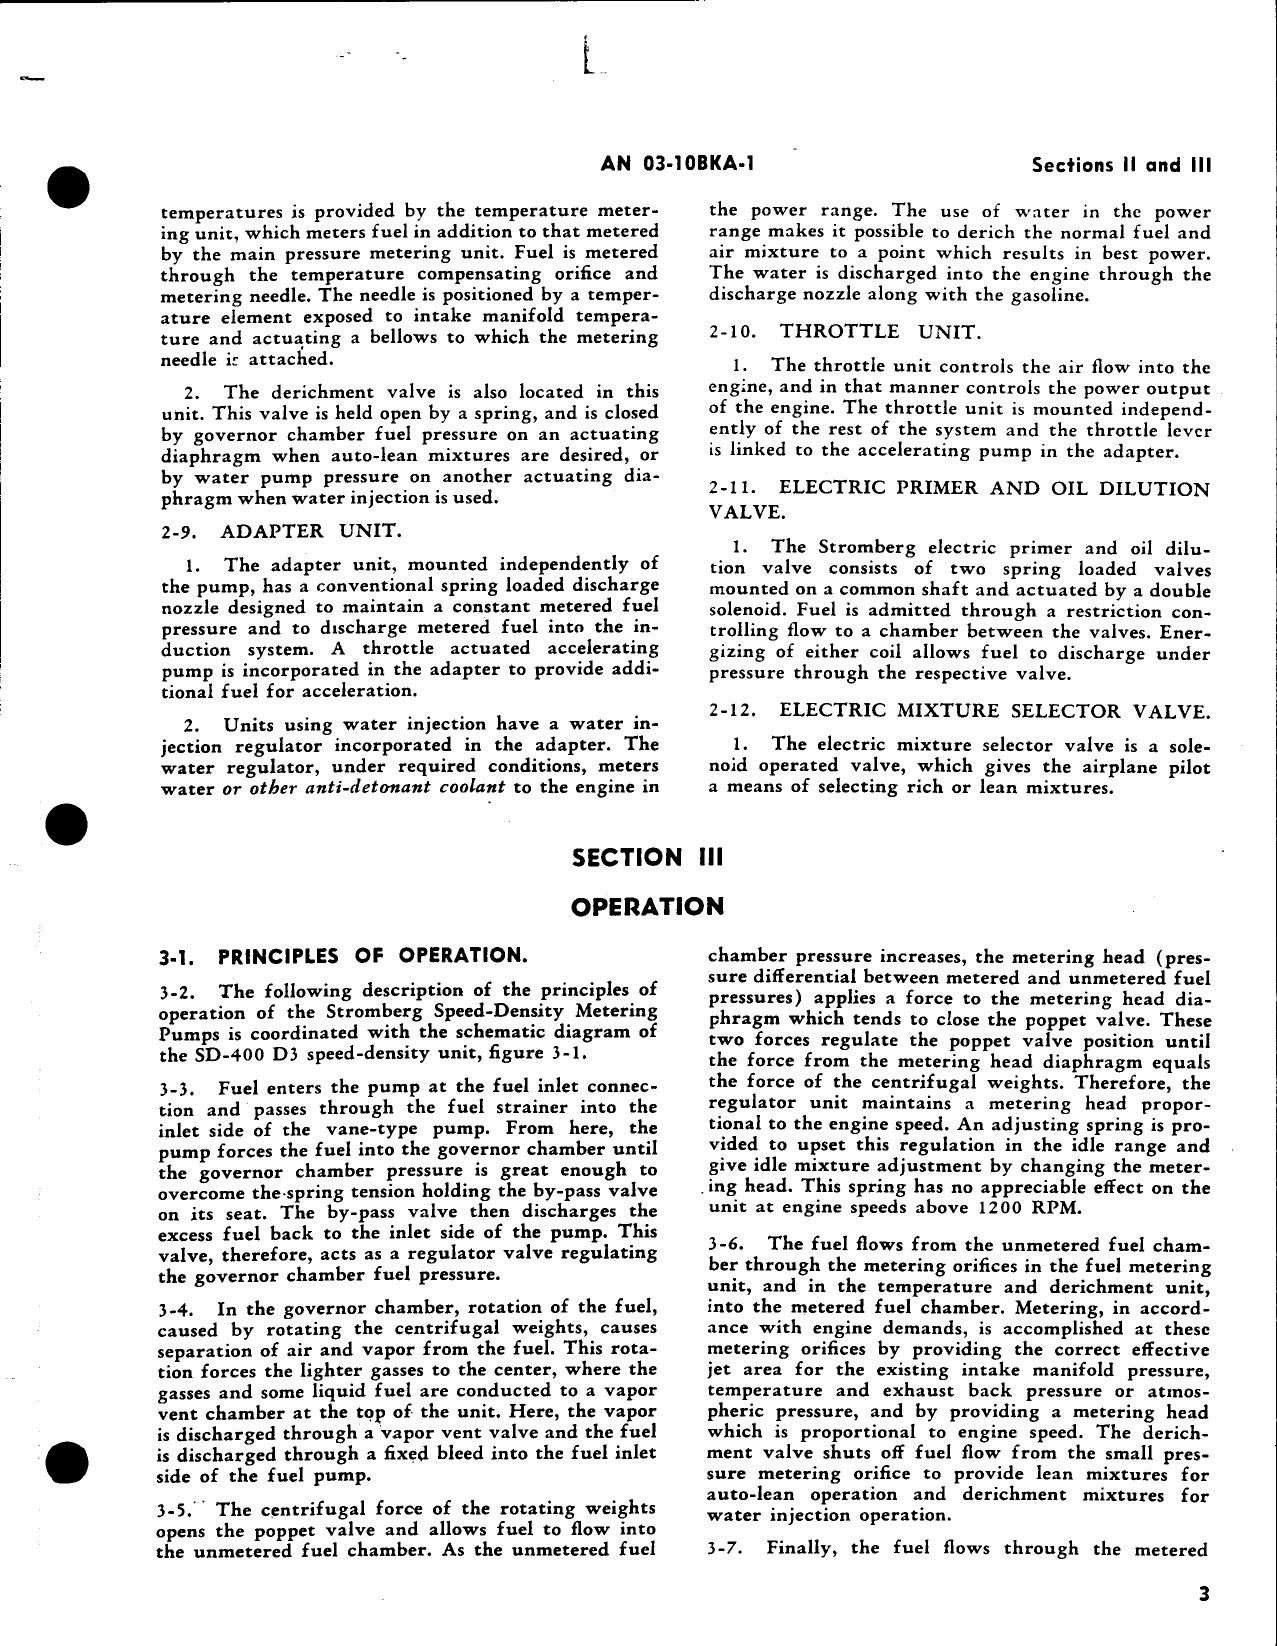 Sample page 7 from AirCorps Library document: Handbook Overhaul Instructions for Speed-Density Fuel Metering System (Bendix)